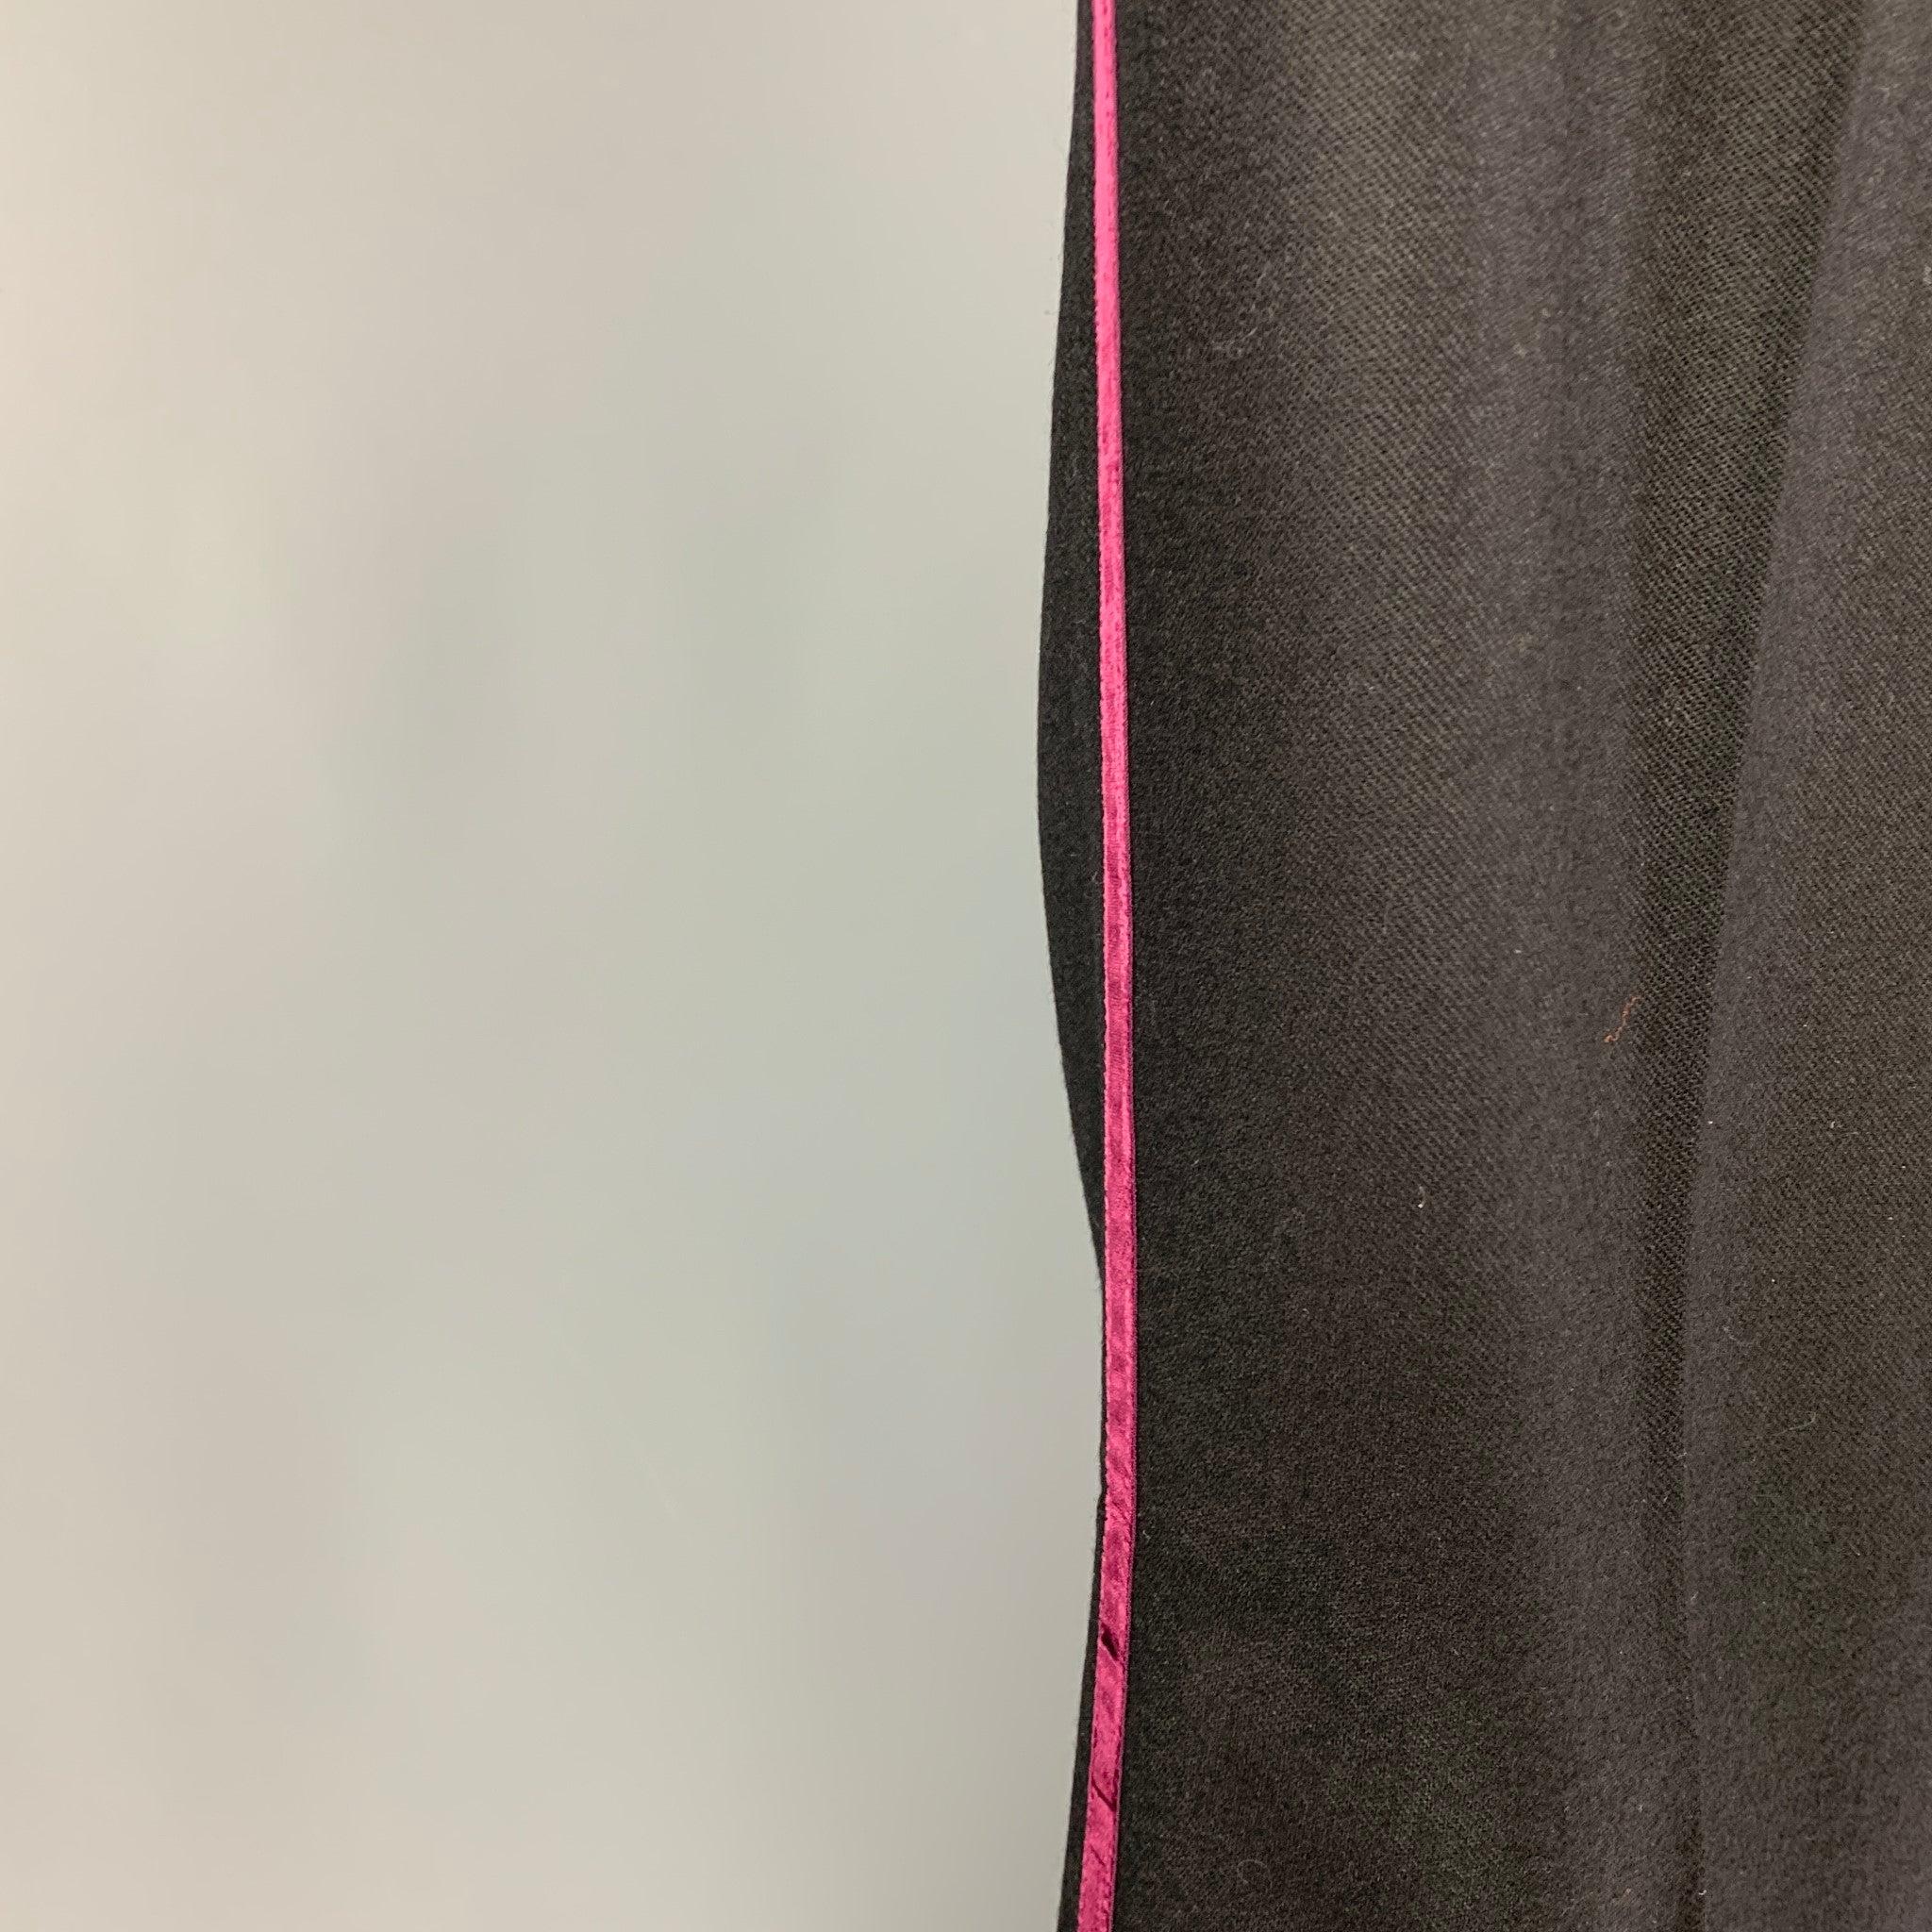 BURBERRY PRORSUM dress pants comes in a black wool featuring a burgundy velvet trim, flat front, and a zip fl closure. Made in Italy.
Very Good
Pre-Owned Condition. 

Marked:   50 

Measurements: 
  Waist: 32 inches  Rise: 10.5 inches  Inseam: 35